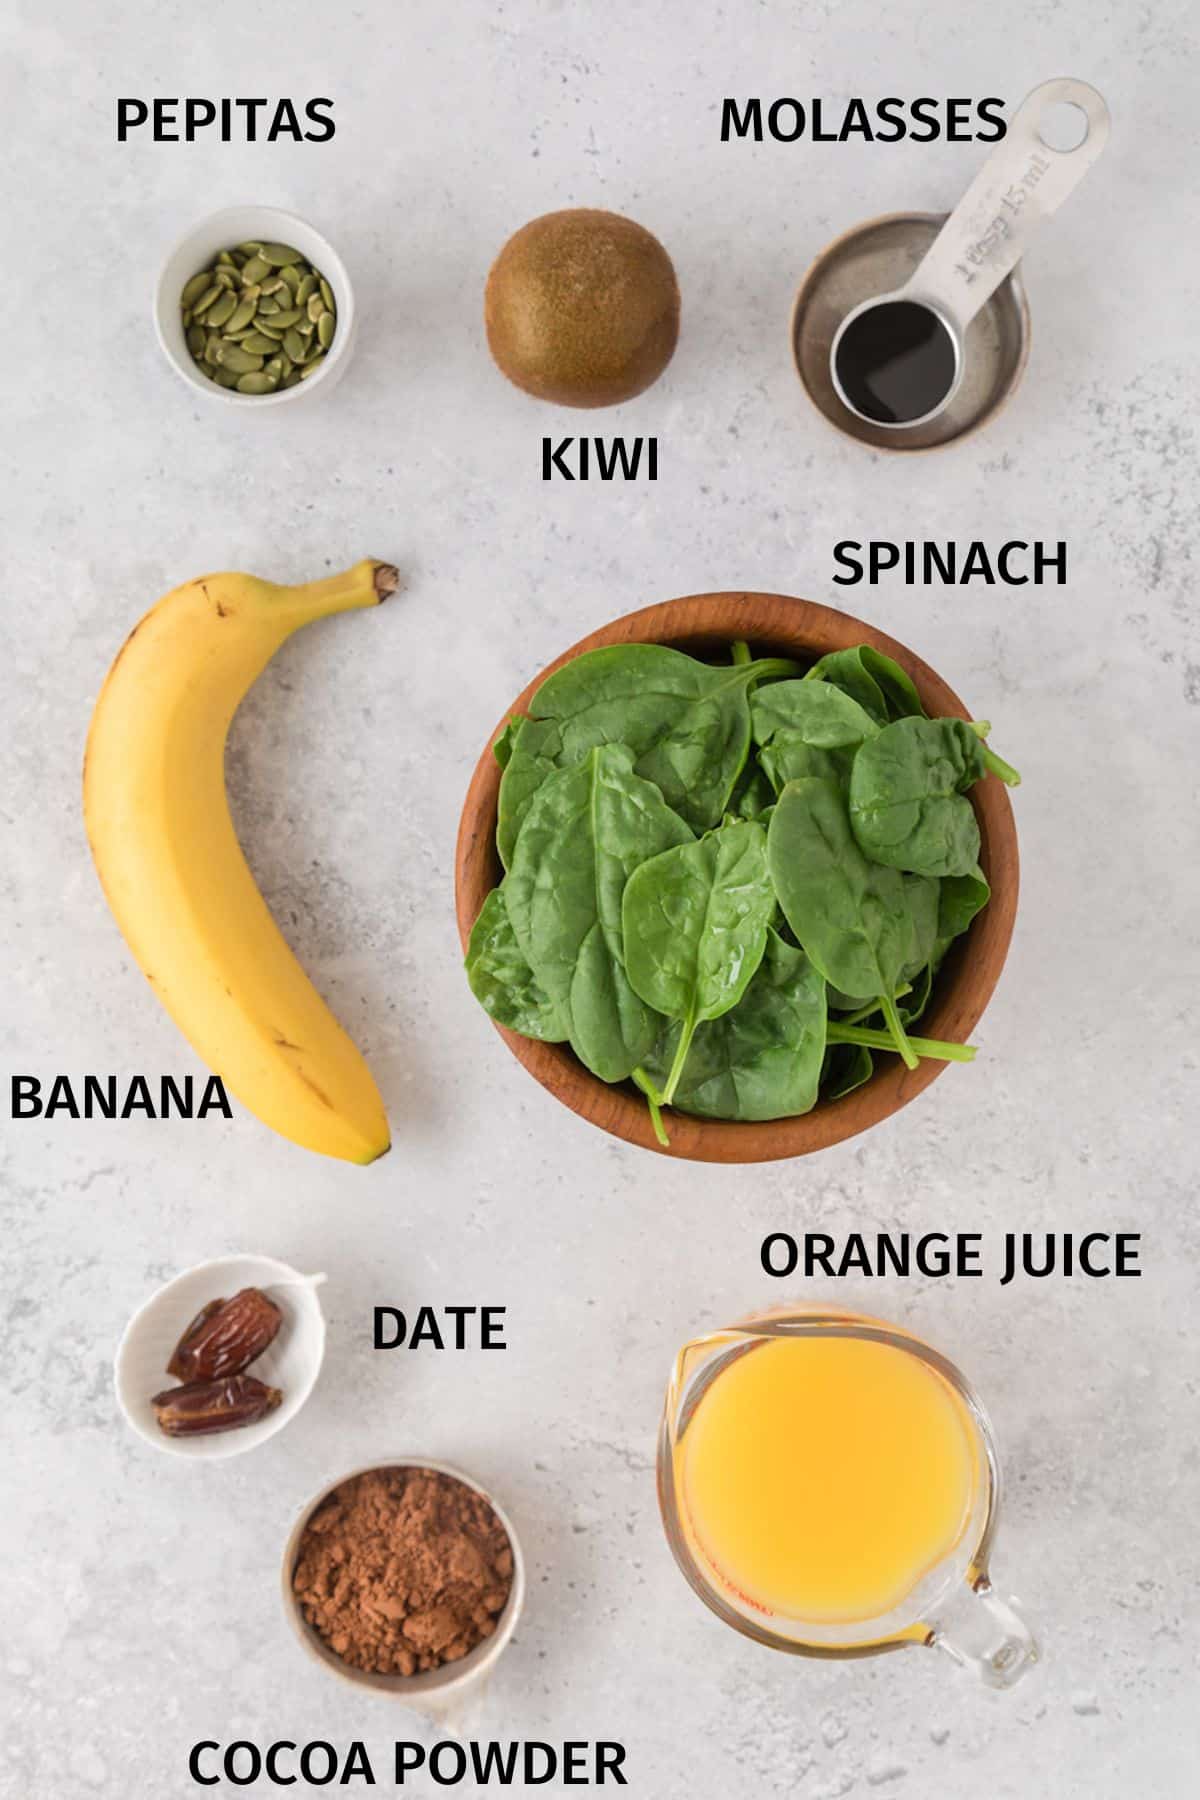 Ingredients to make an iron rich smoothie in small bowls on a white surface.